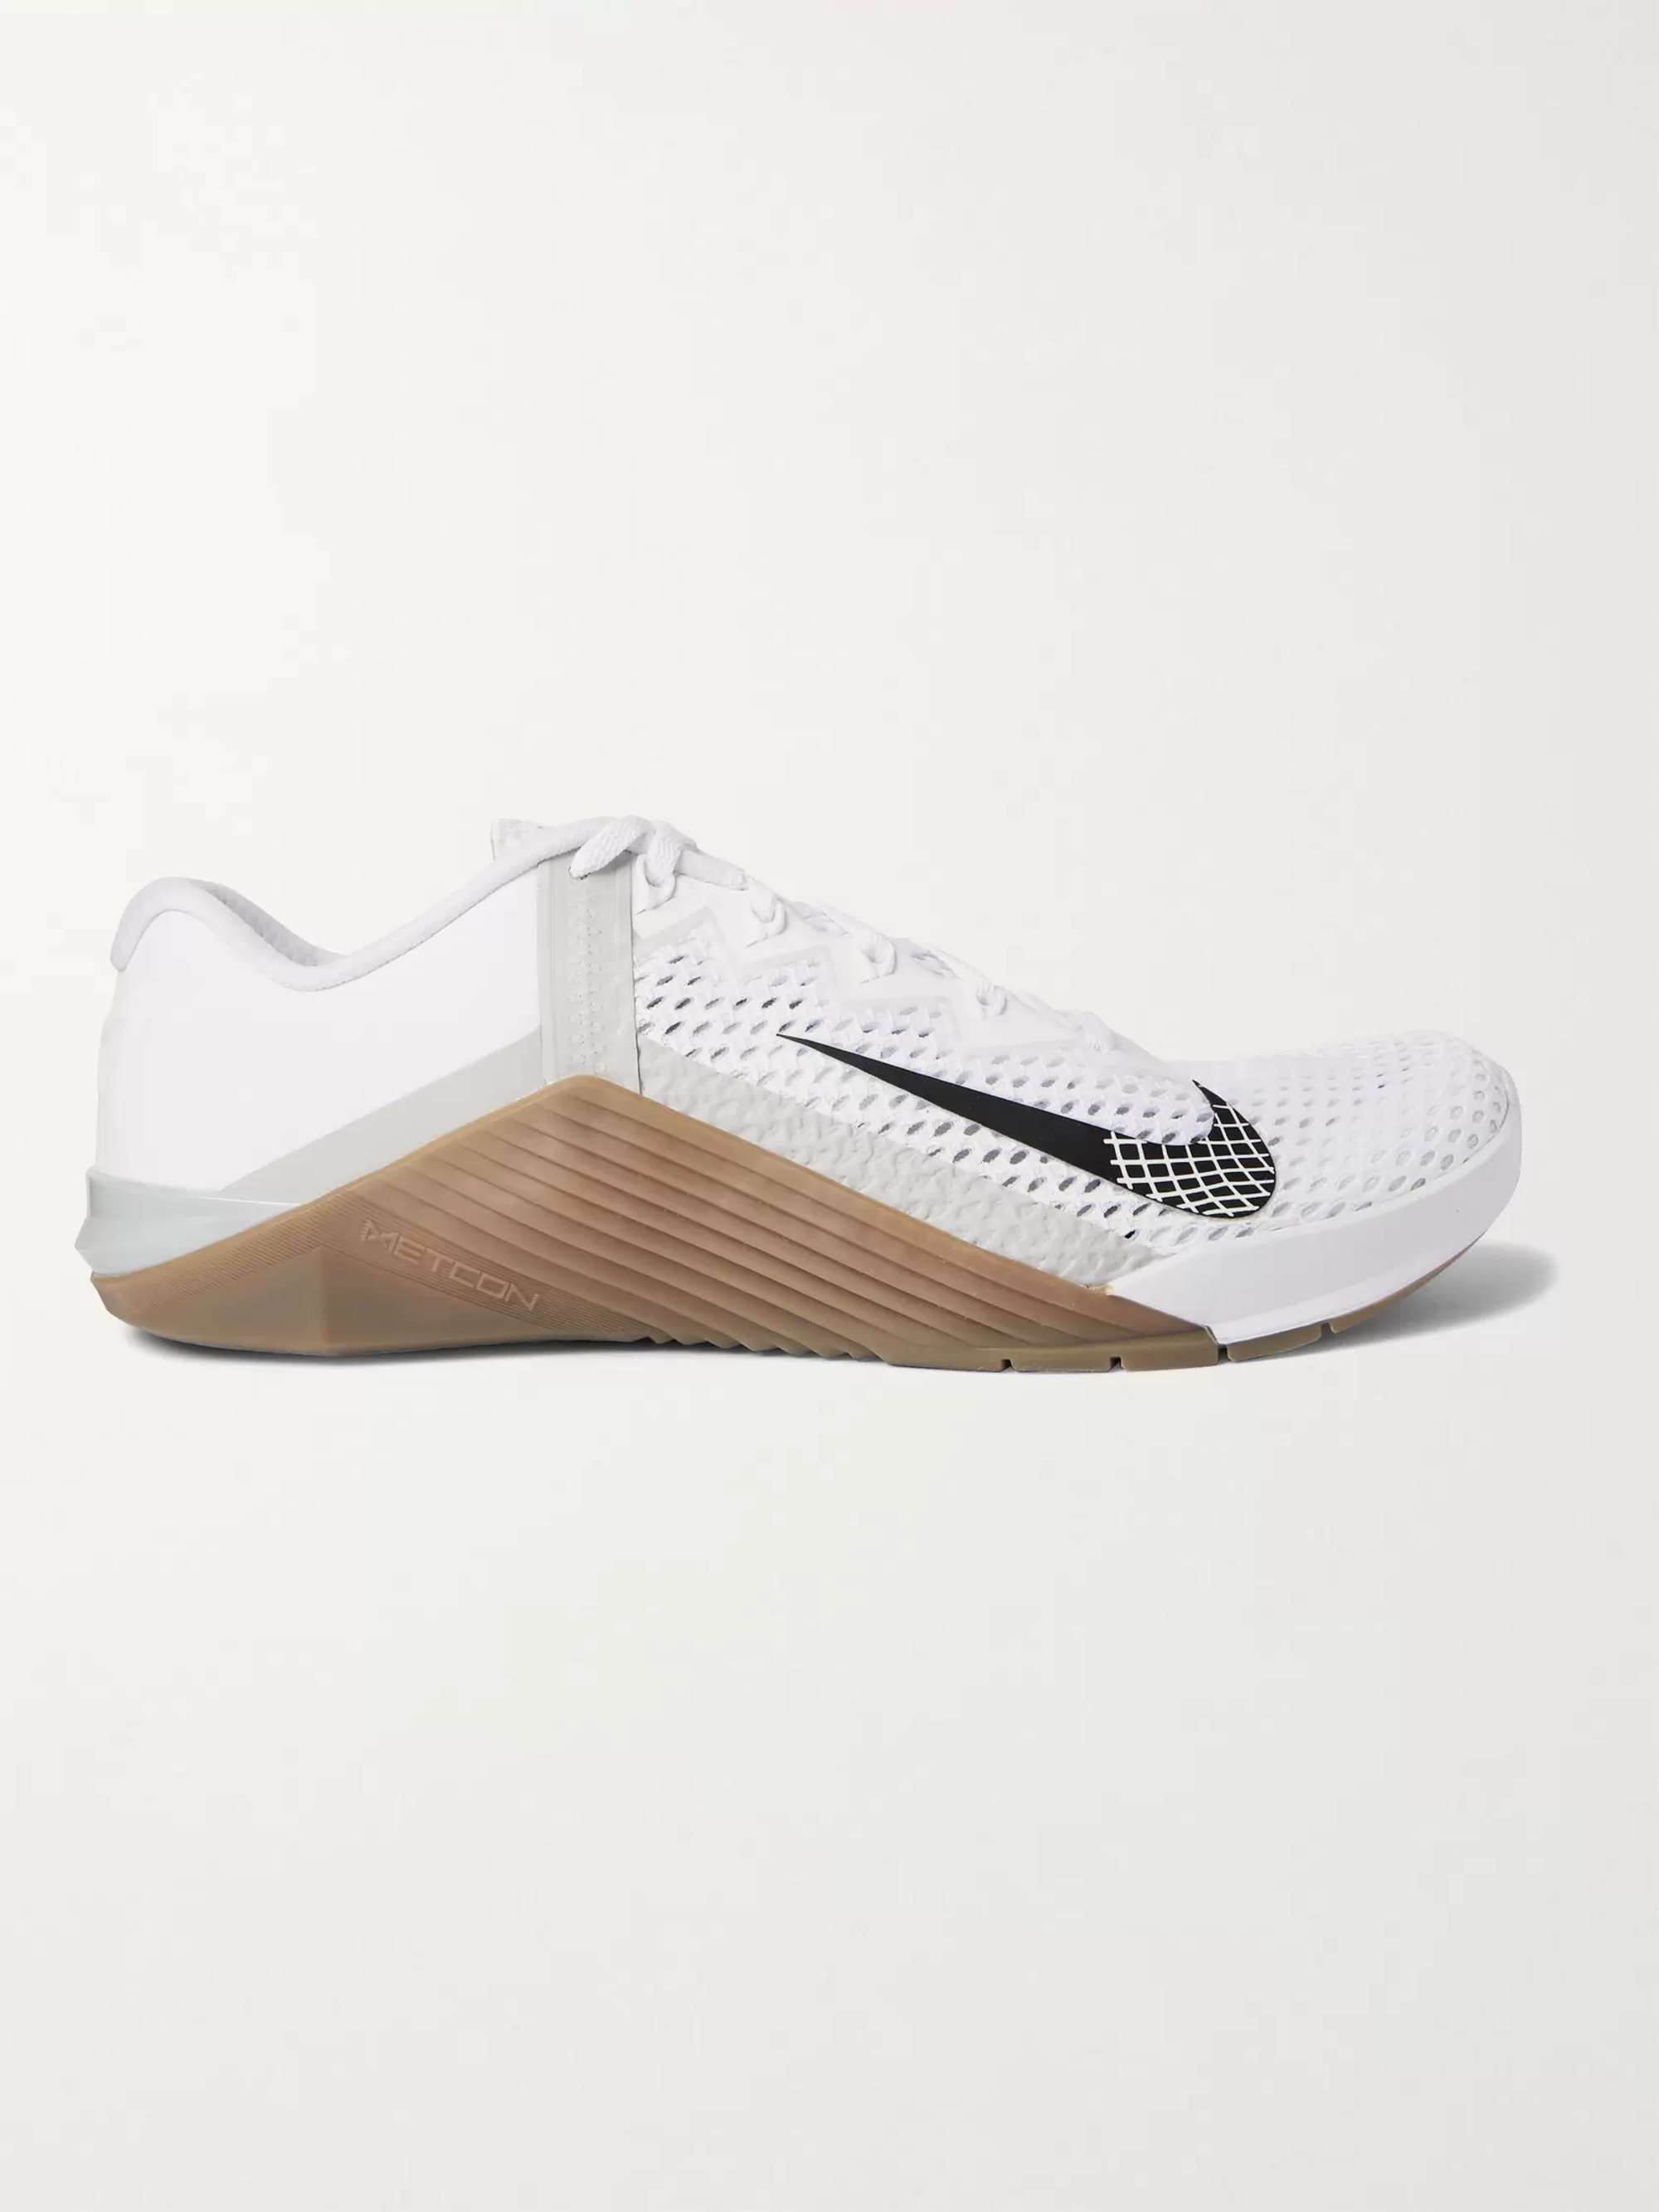 NIKE TRAINING Metcon 6 Rubber-Trimmed Mesh Sneakers